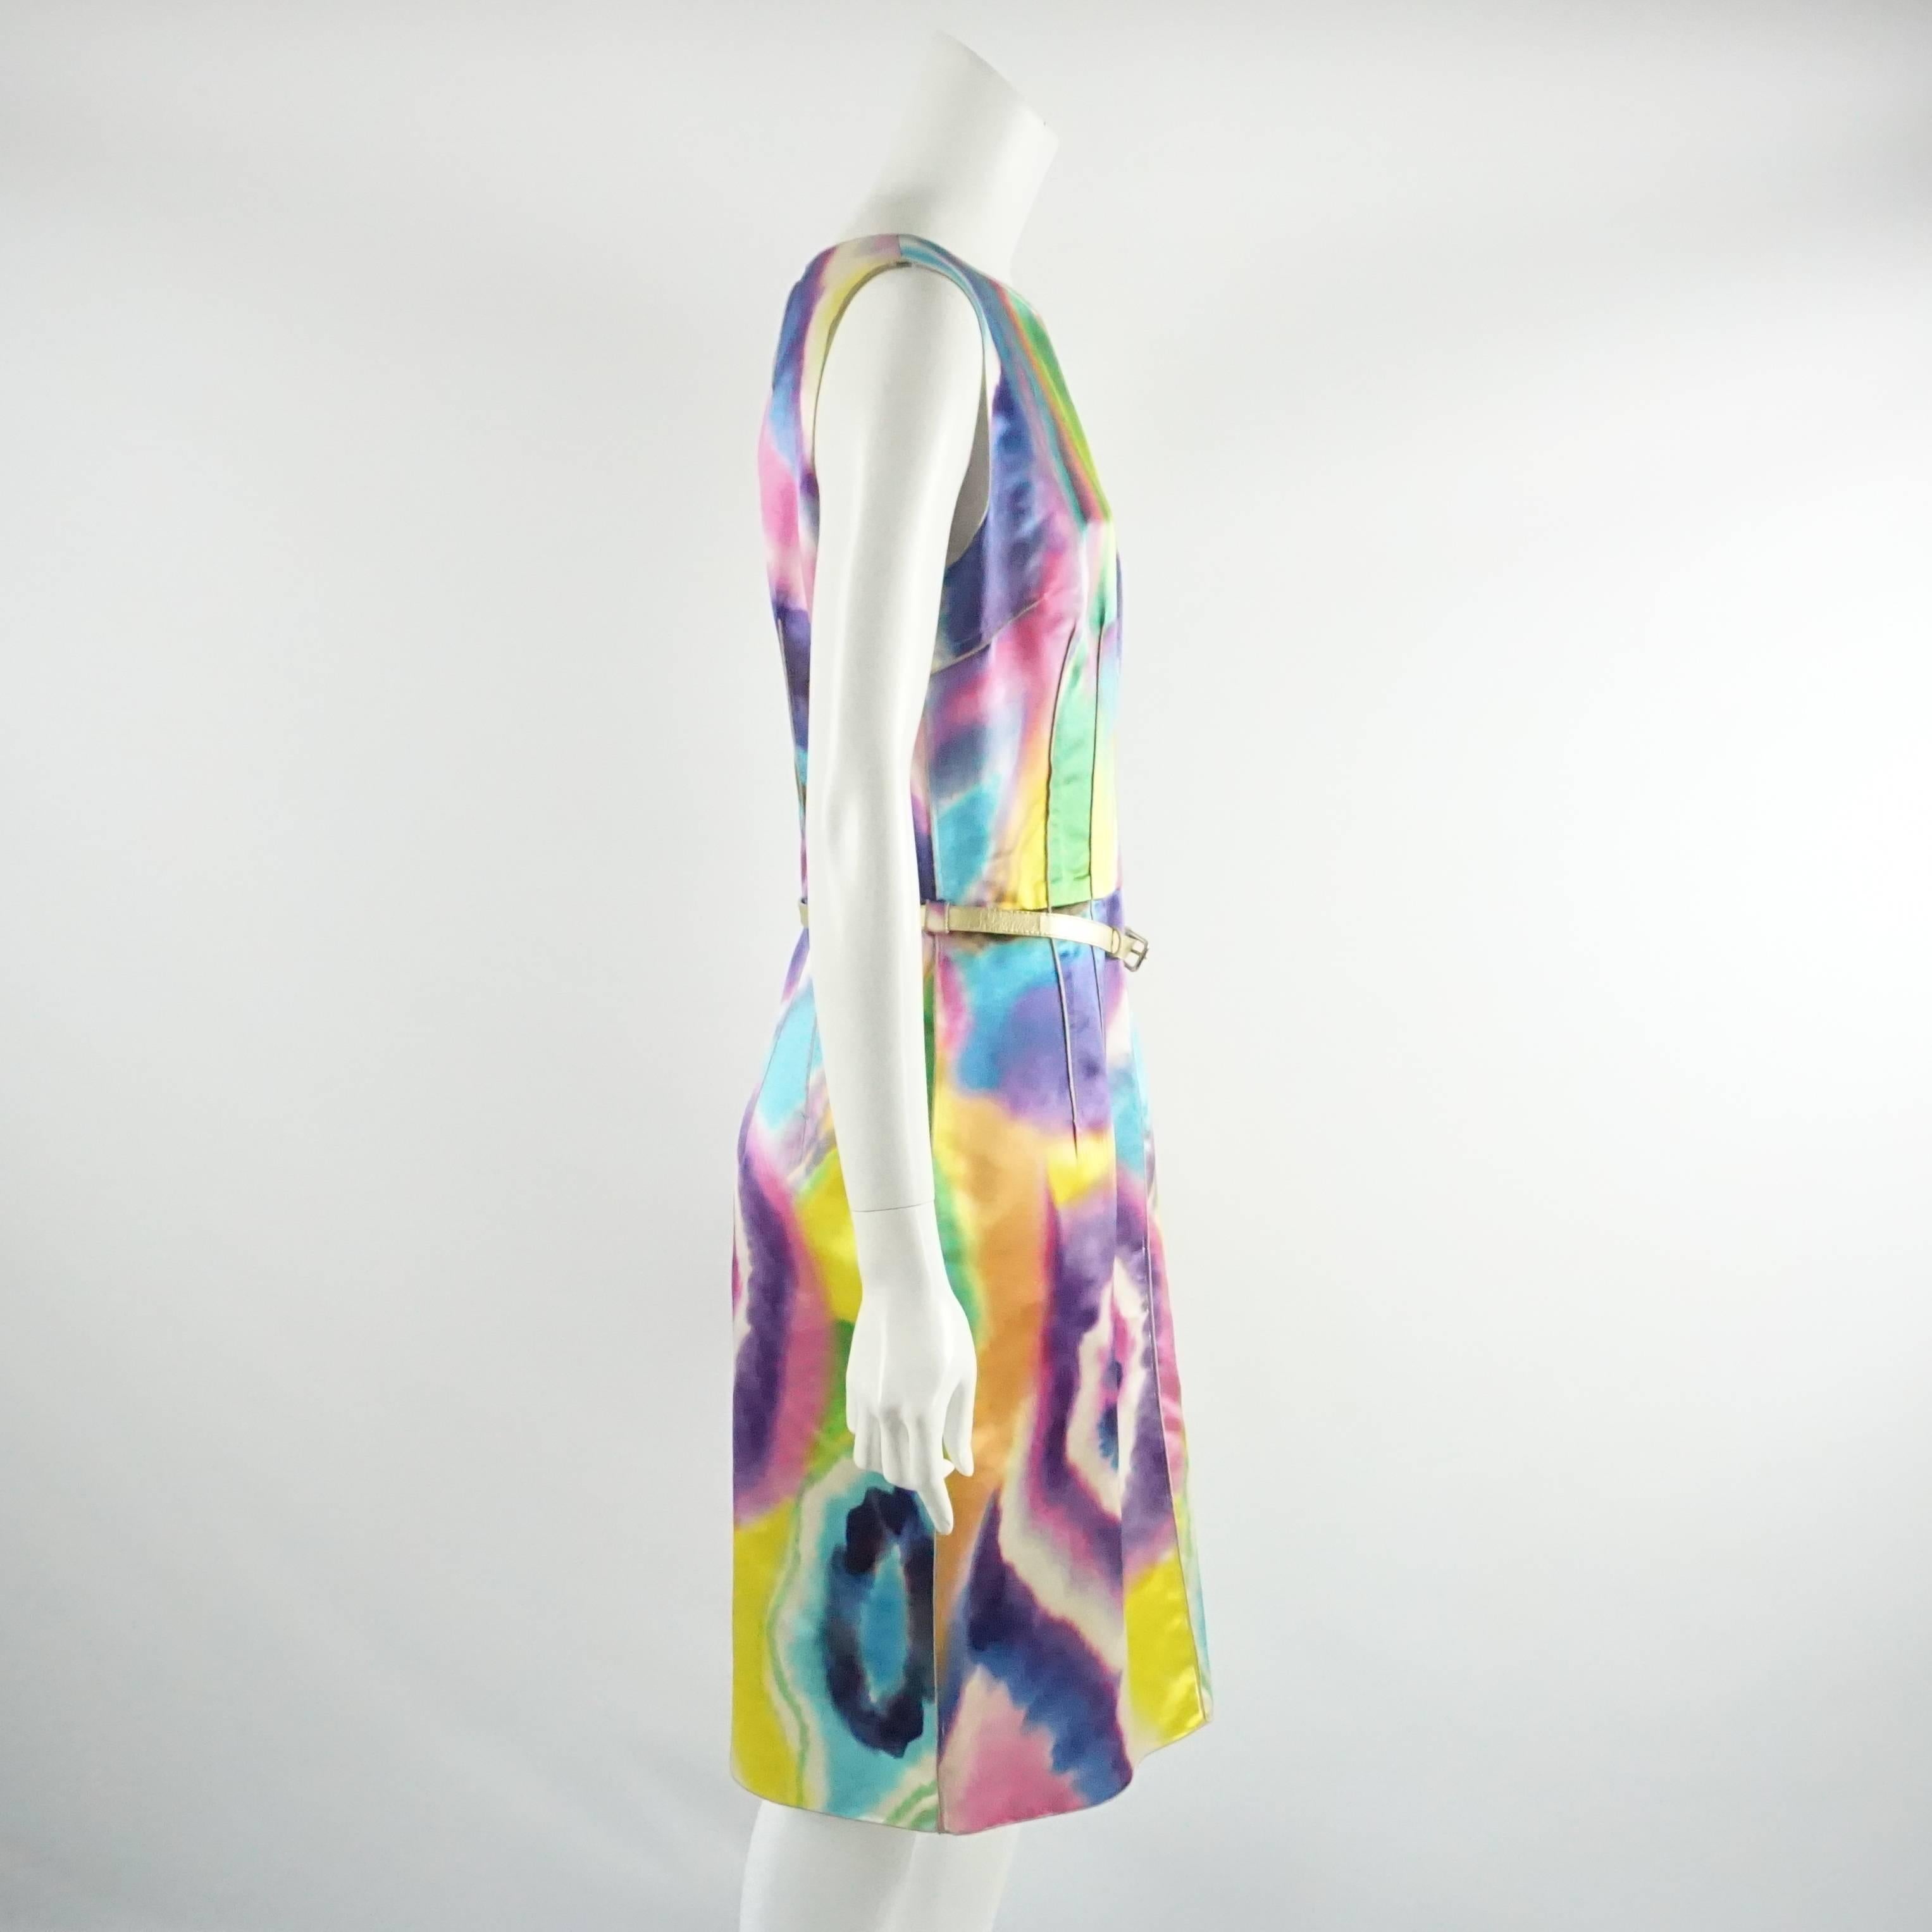 This unique Dolce & Gabbana dress is a tie dye print silk material. It is sleeveless with tapered stitches, 2 side pockets, and a thin gold leather belt. Size 44, circa 21st century. 

Measurements
Shoulder to Shoulder: 15.5"
Bust: